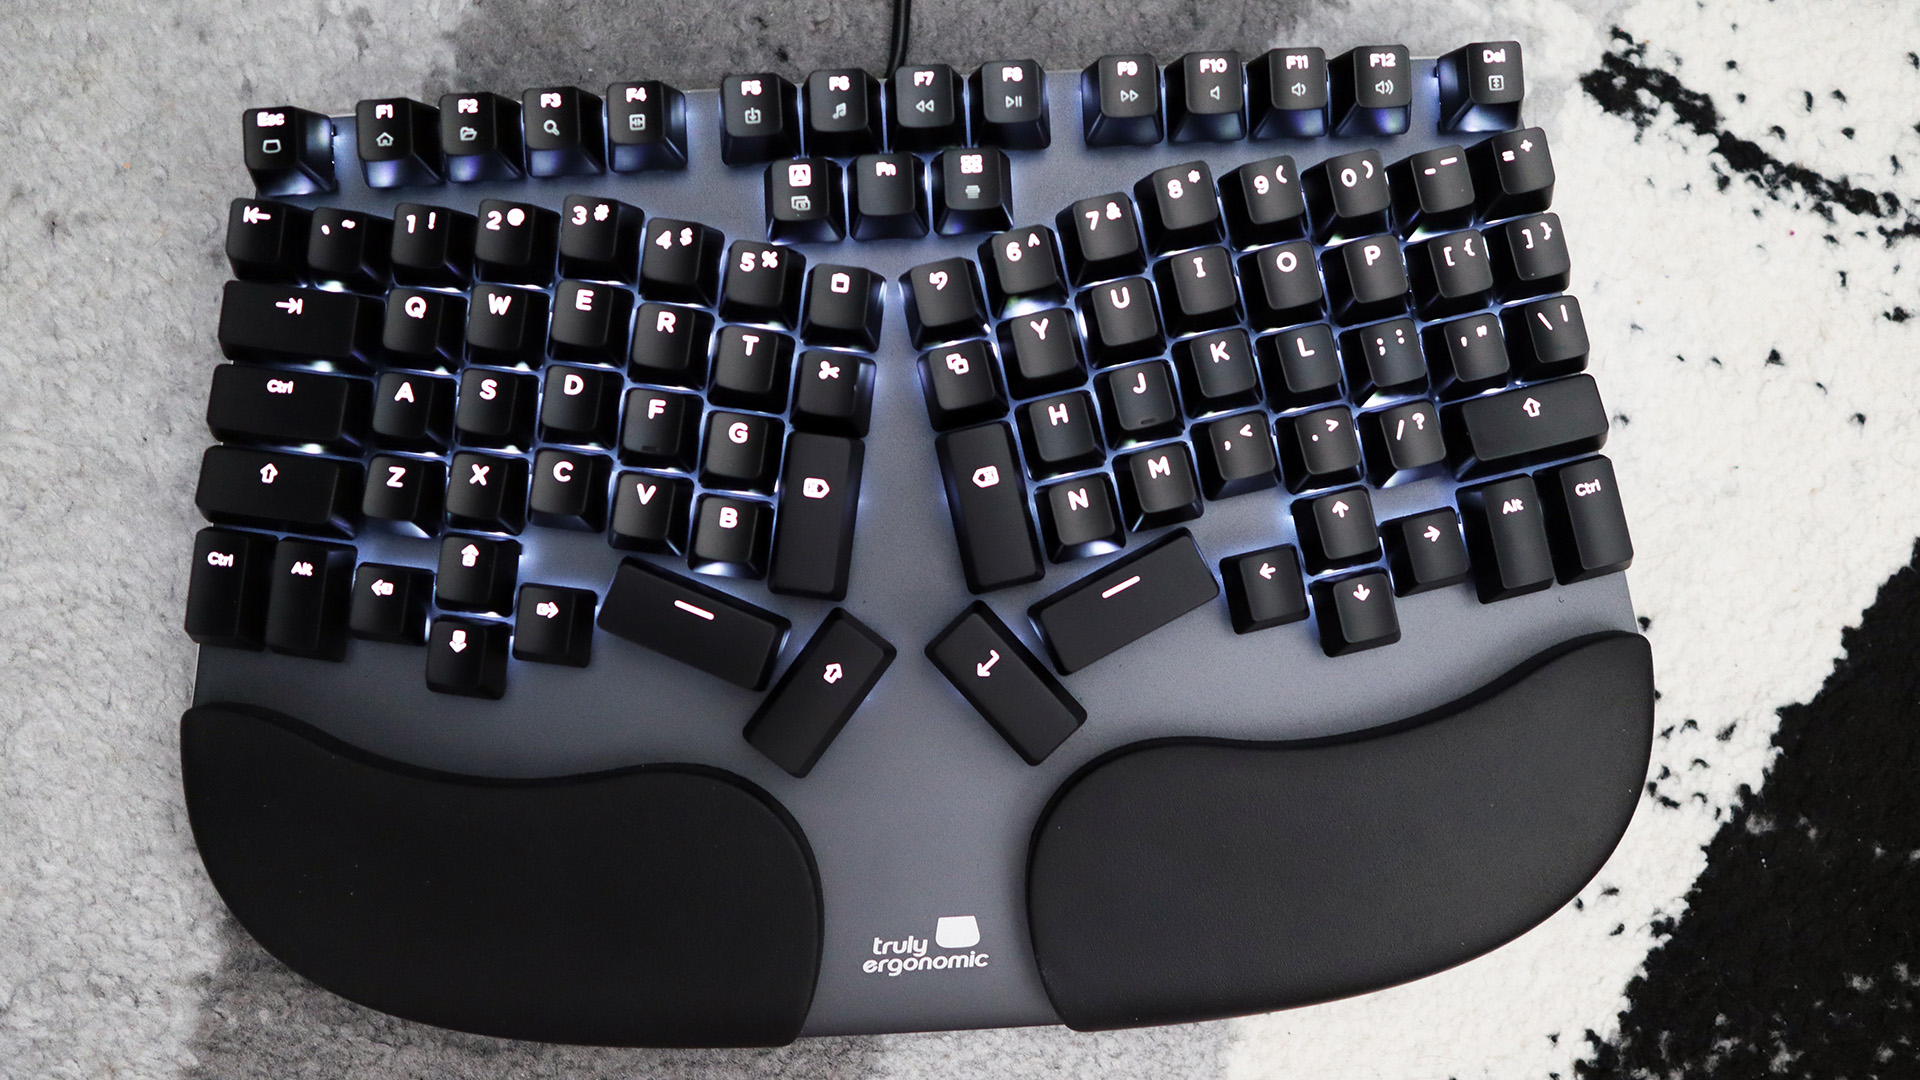  Yes, you can absolutely game on an ergonomic keyboard 